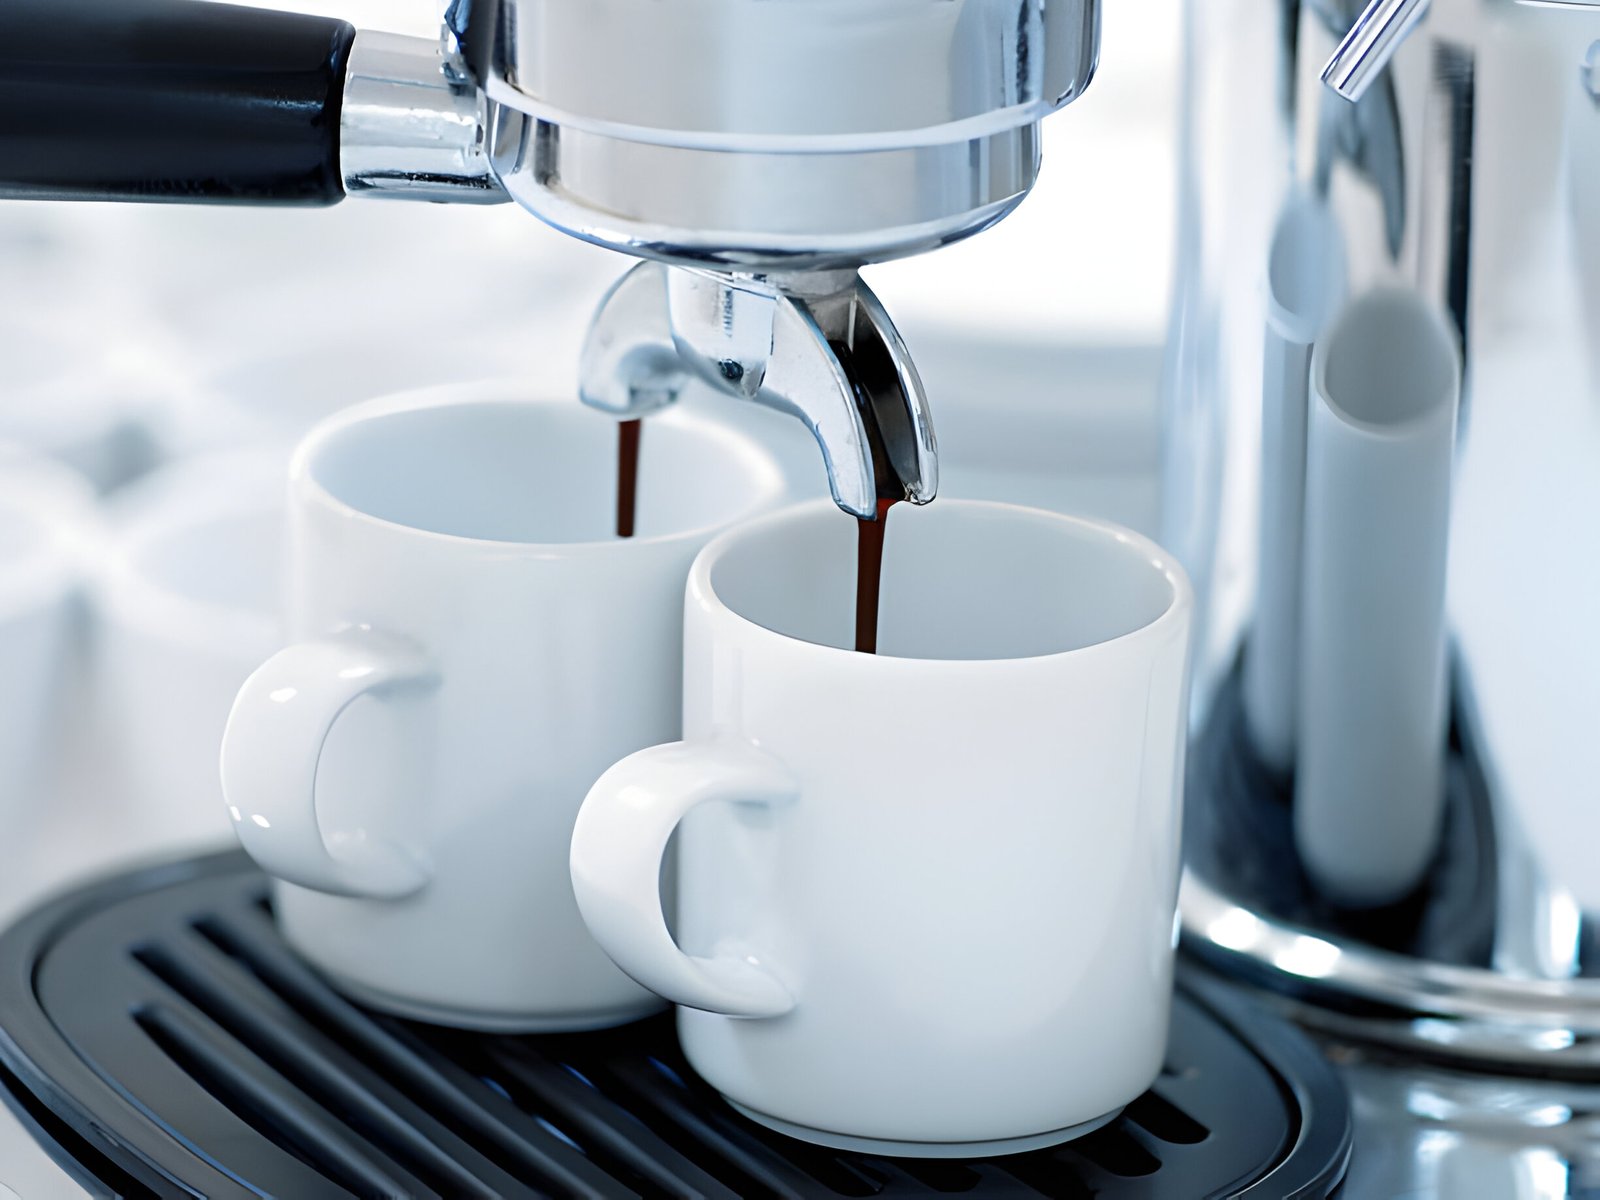 Dual Coffee Maker Comparison: Which One is Right for You?